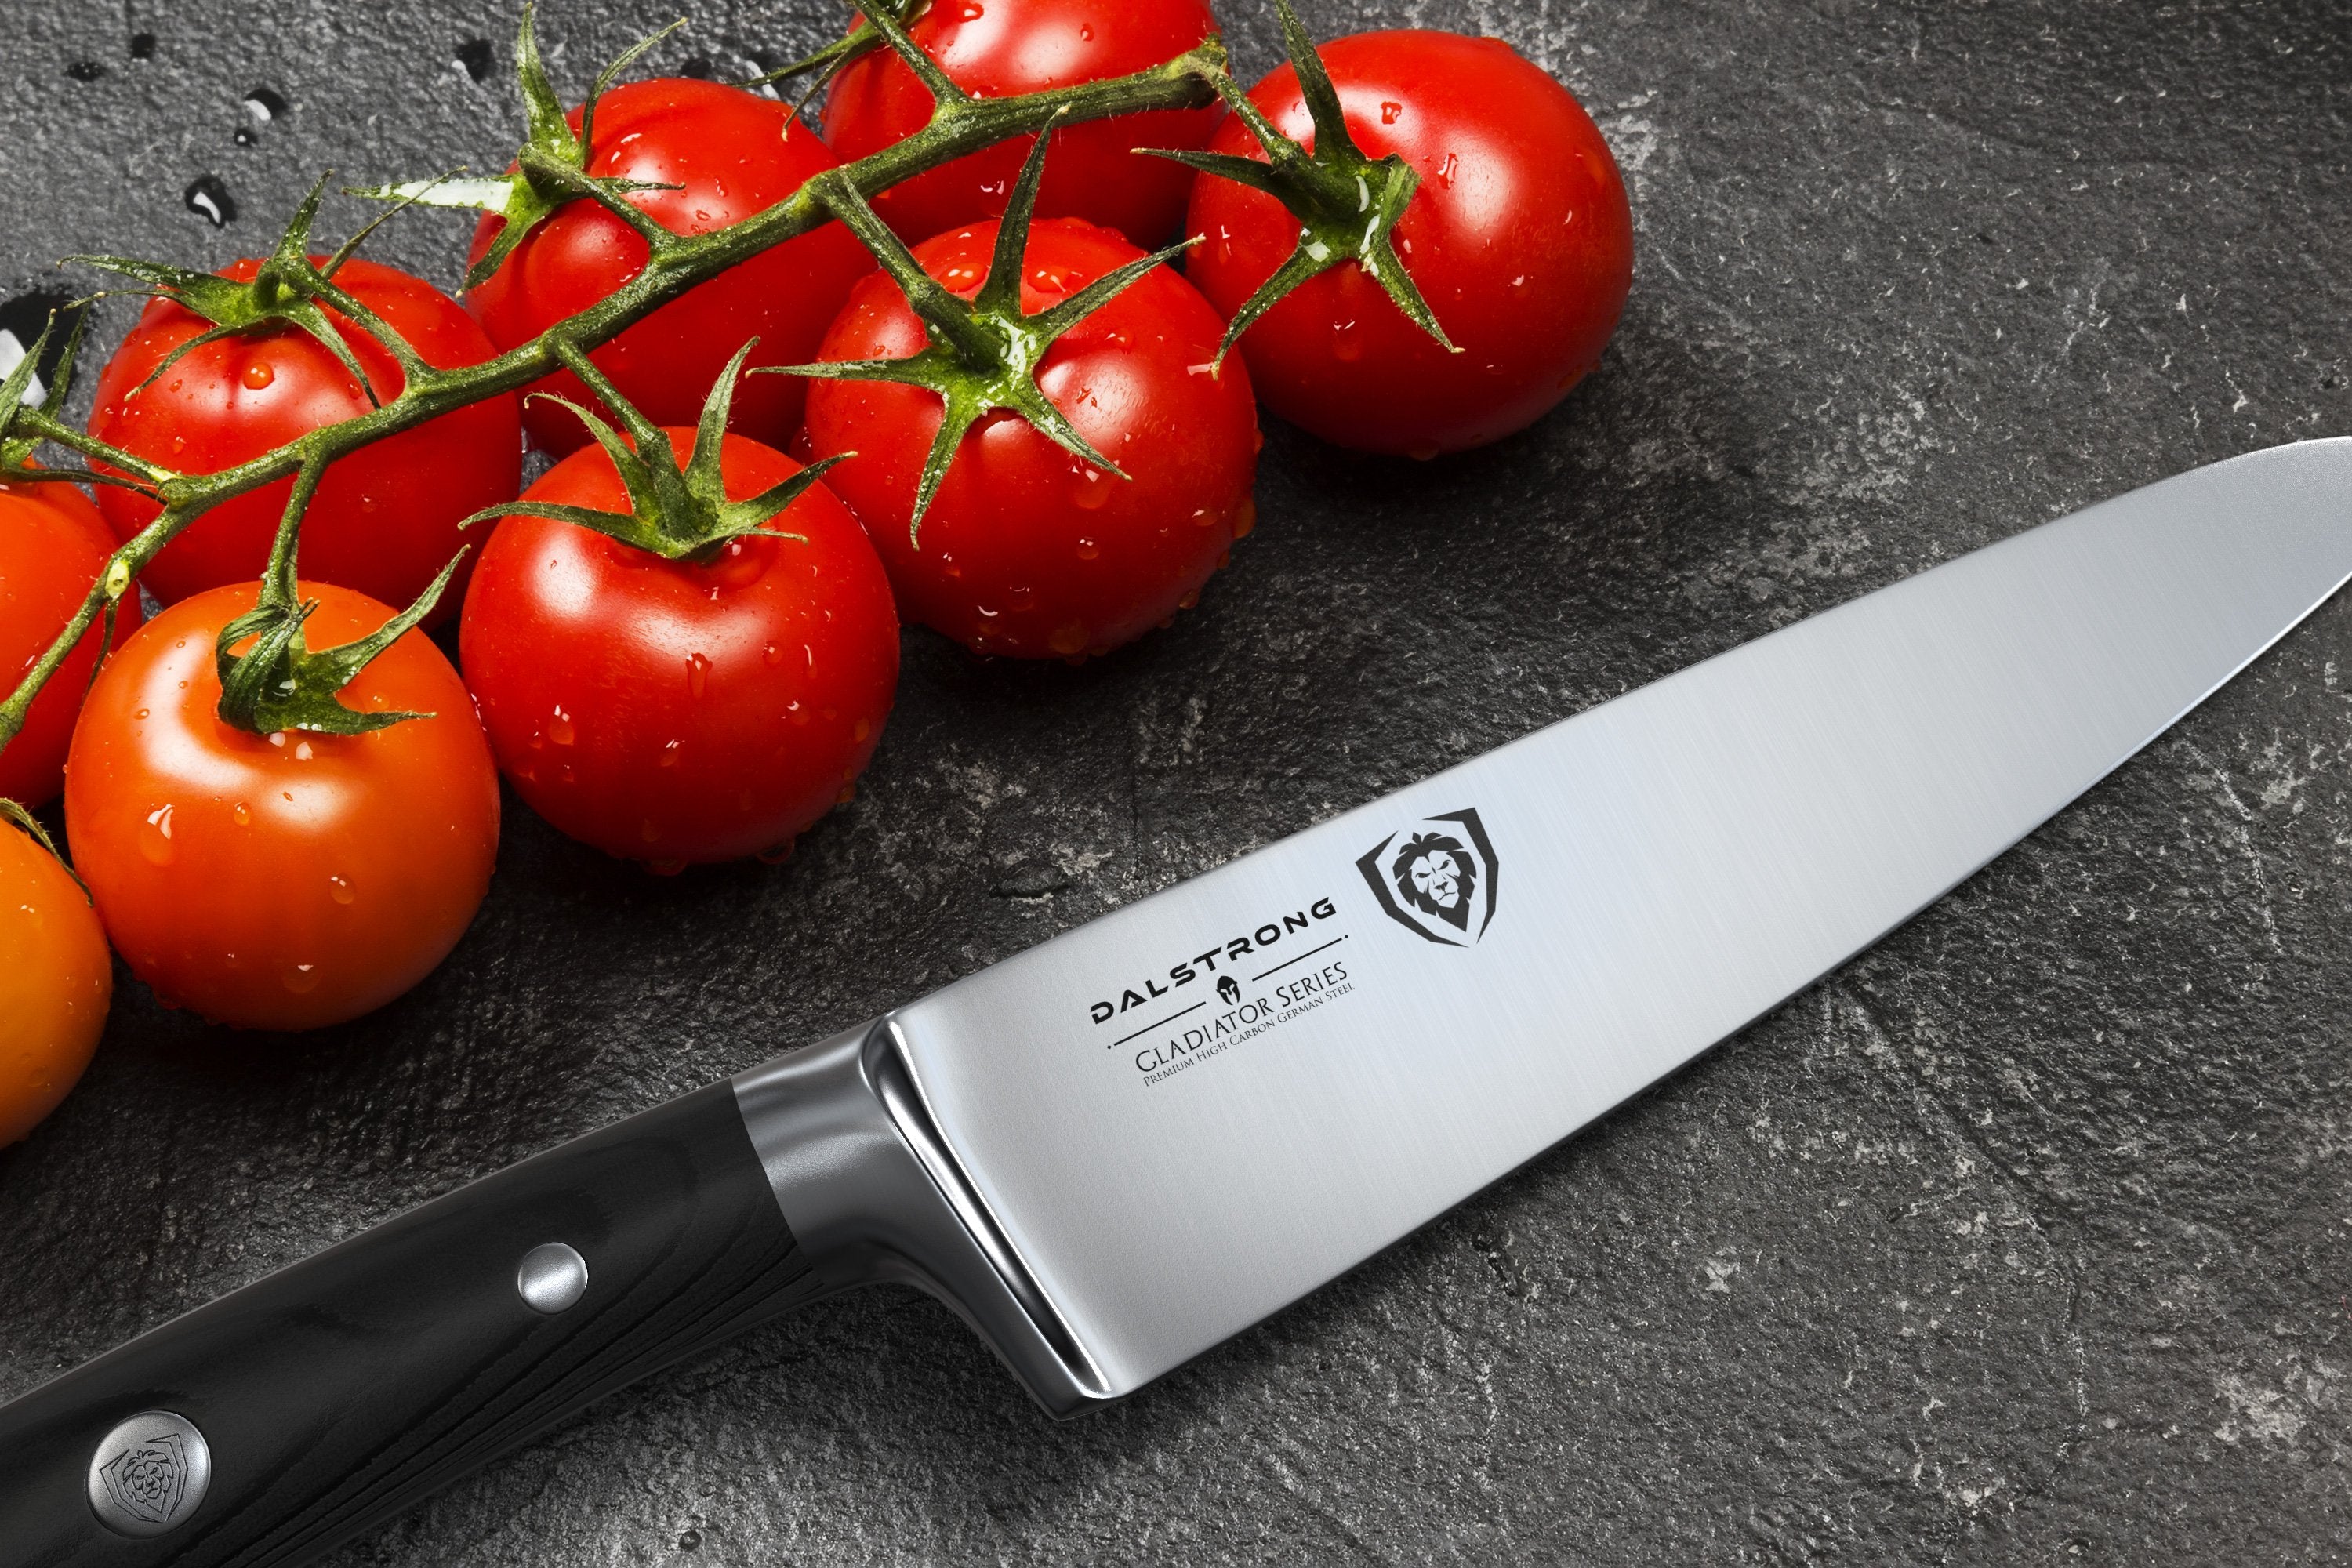 Why Owning a Potato Peeler Is Very Important for Chefs – Dalstrong